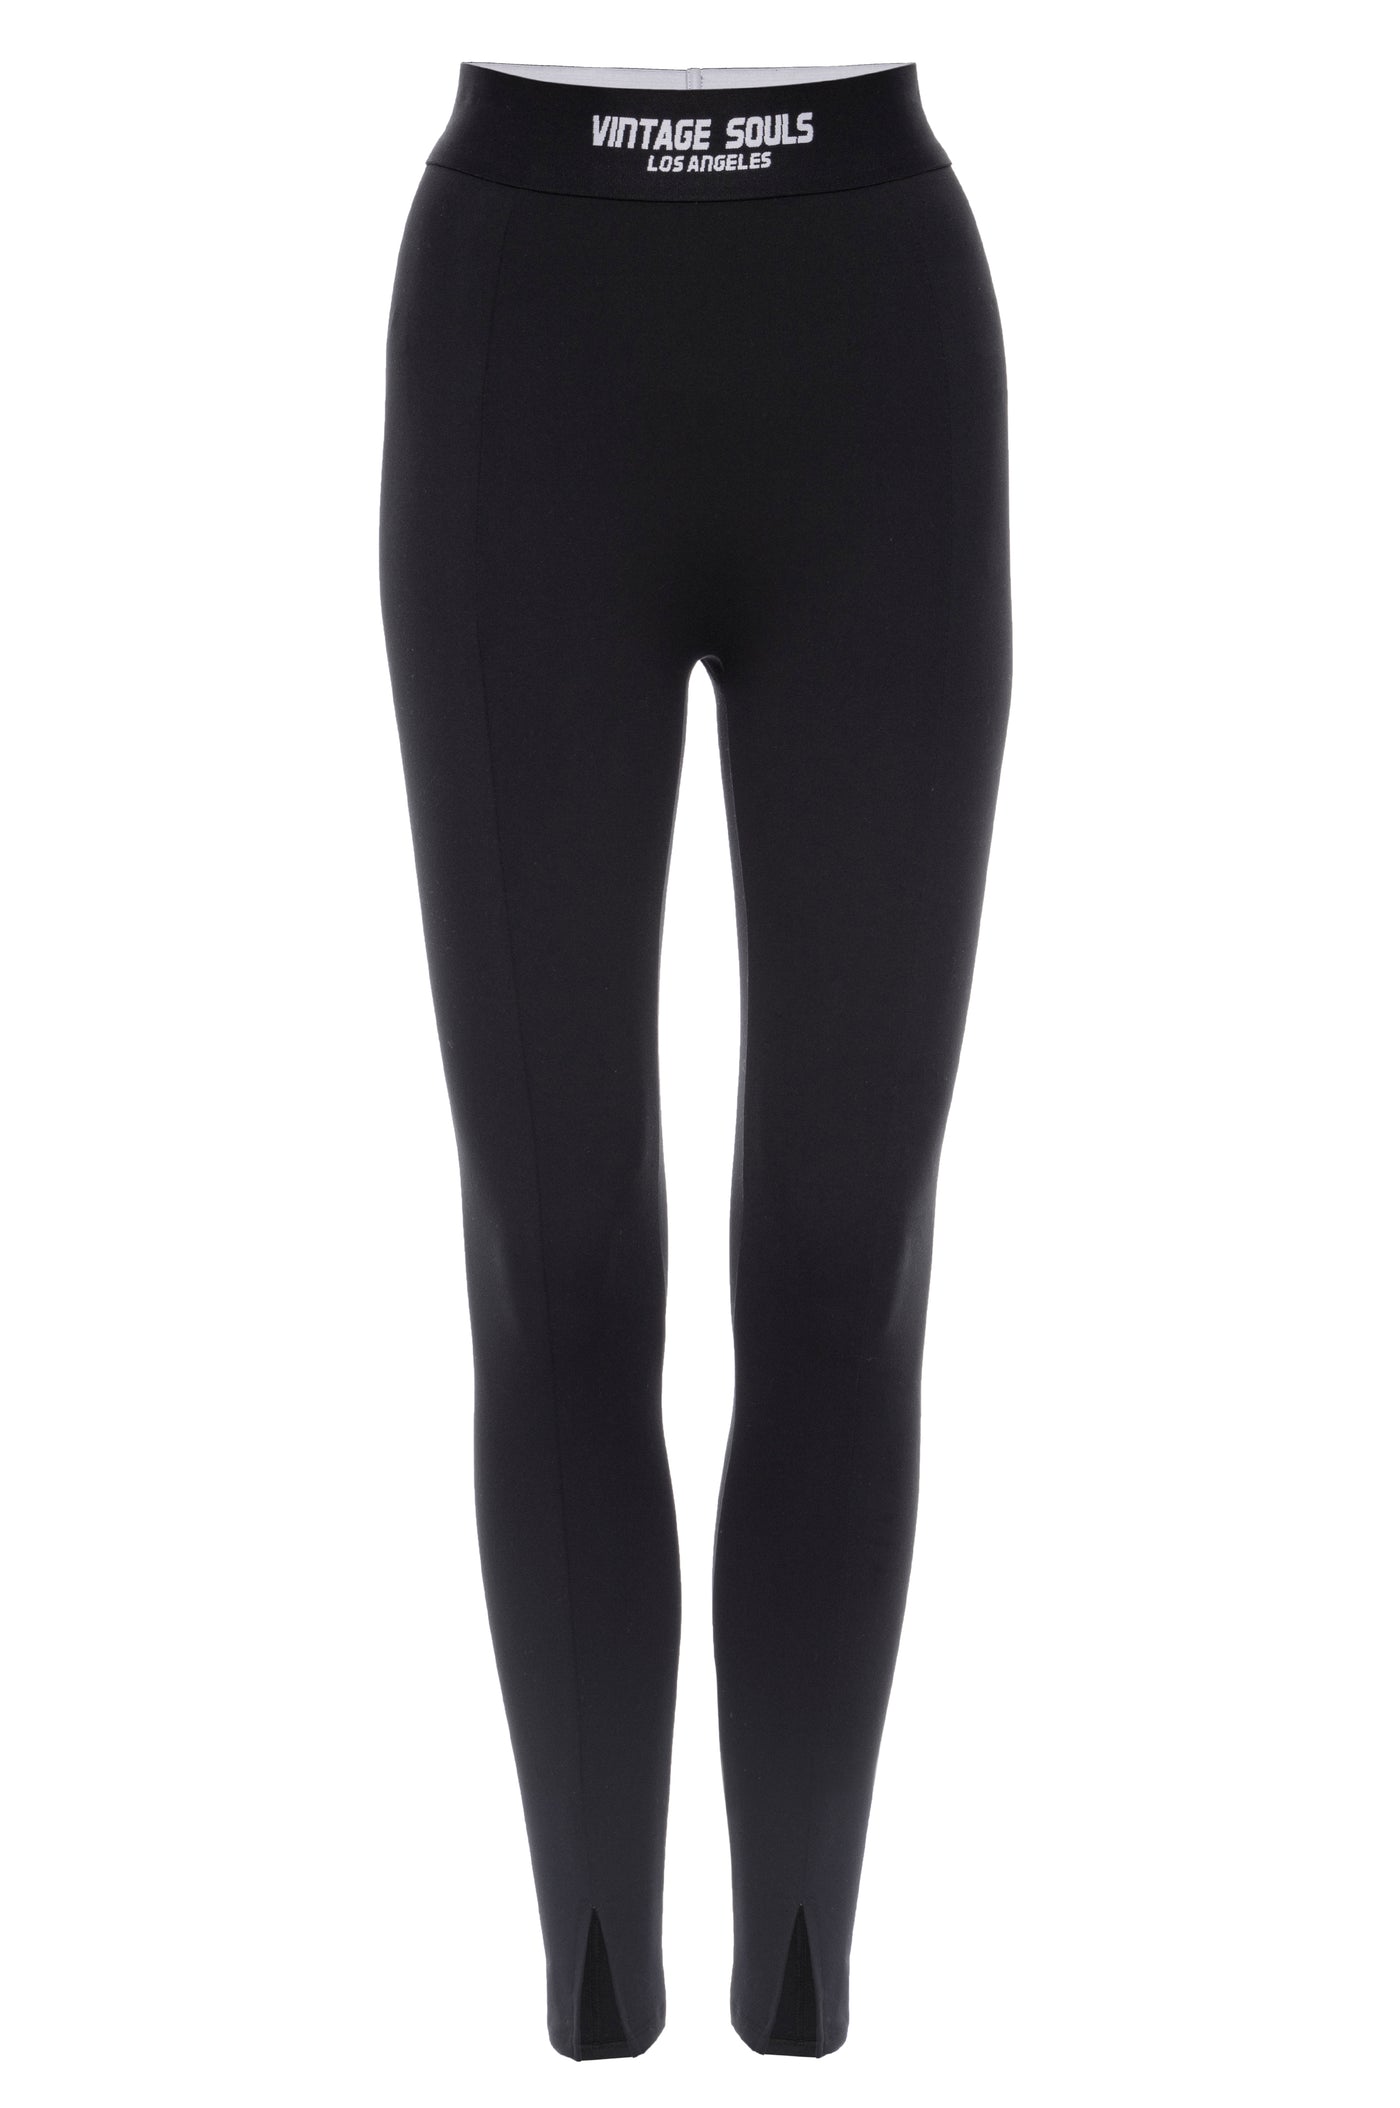 Black Active Leggings with embellished logo waistband and split hem detail, crafted in LA from quality performance fabric.